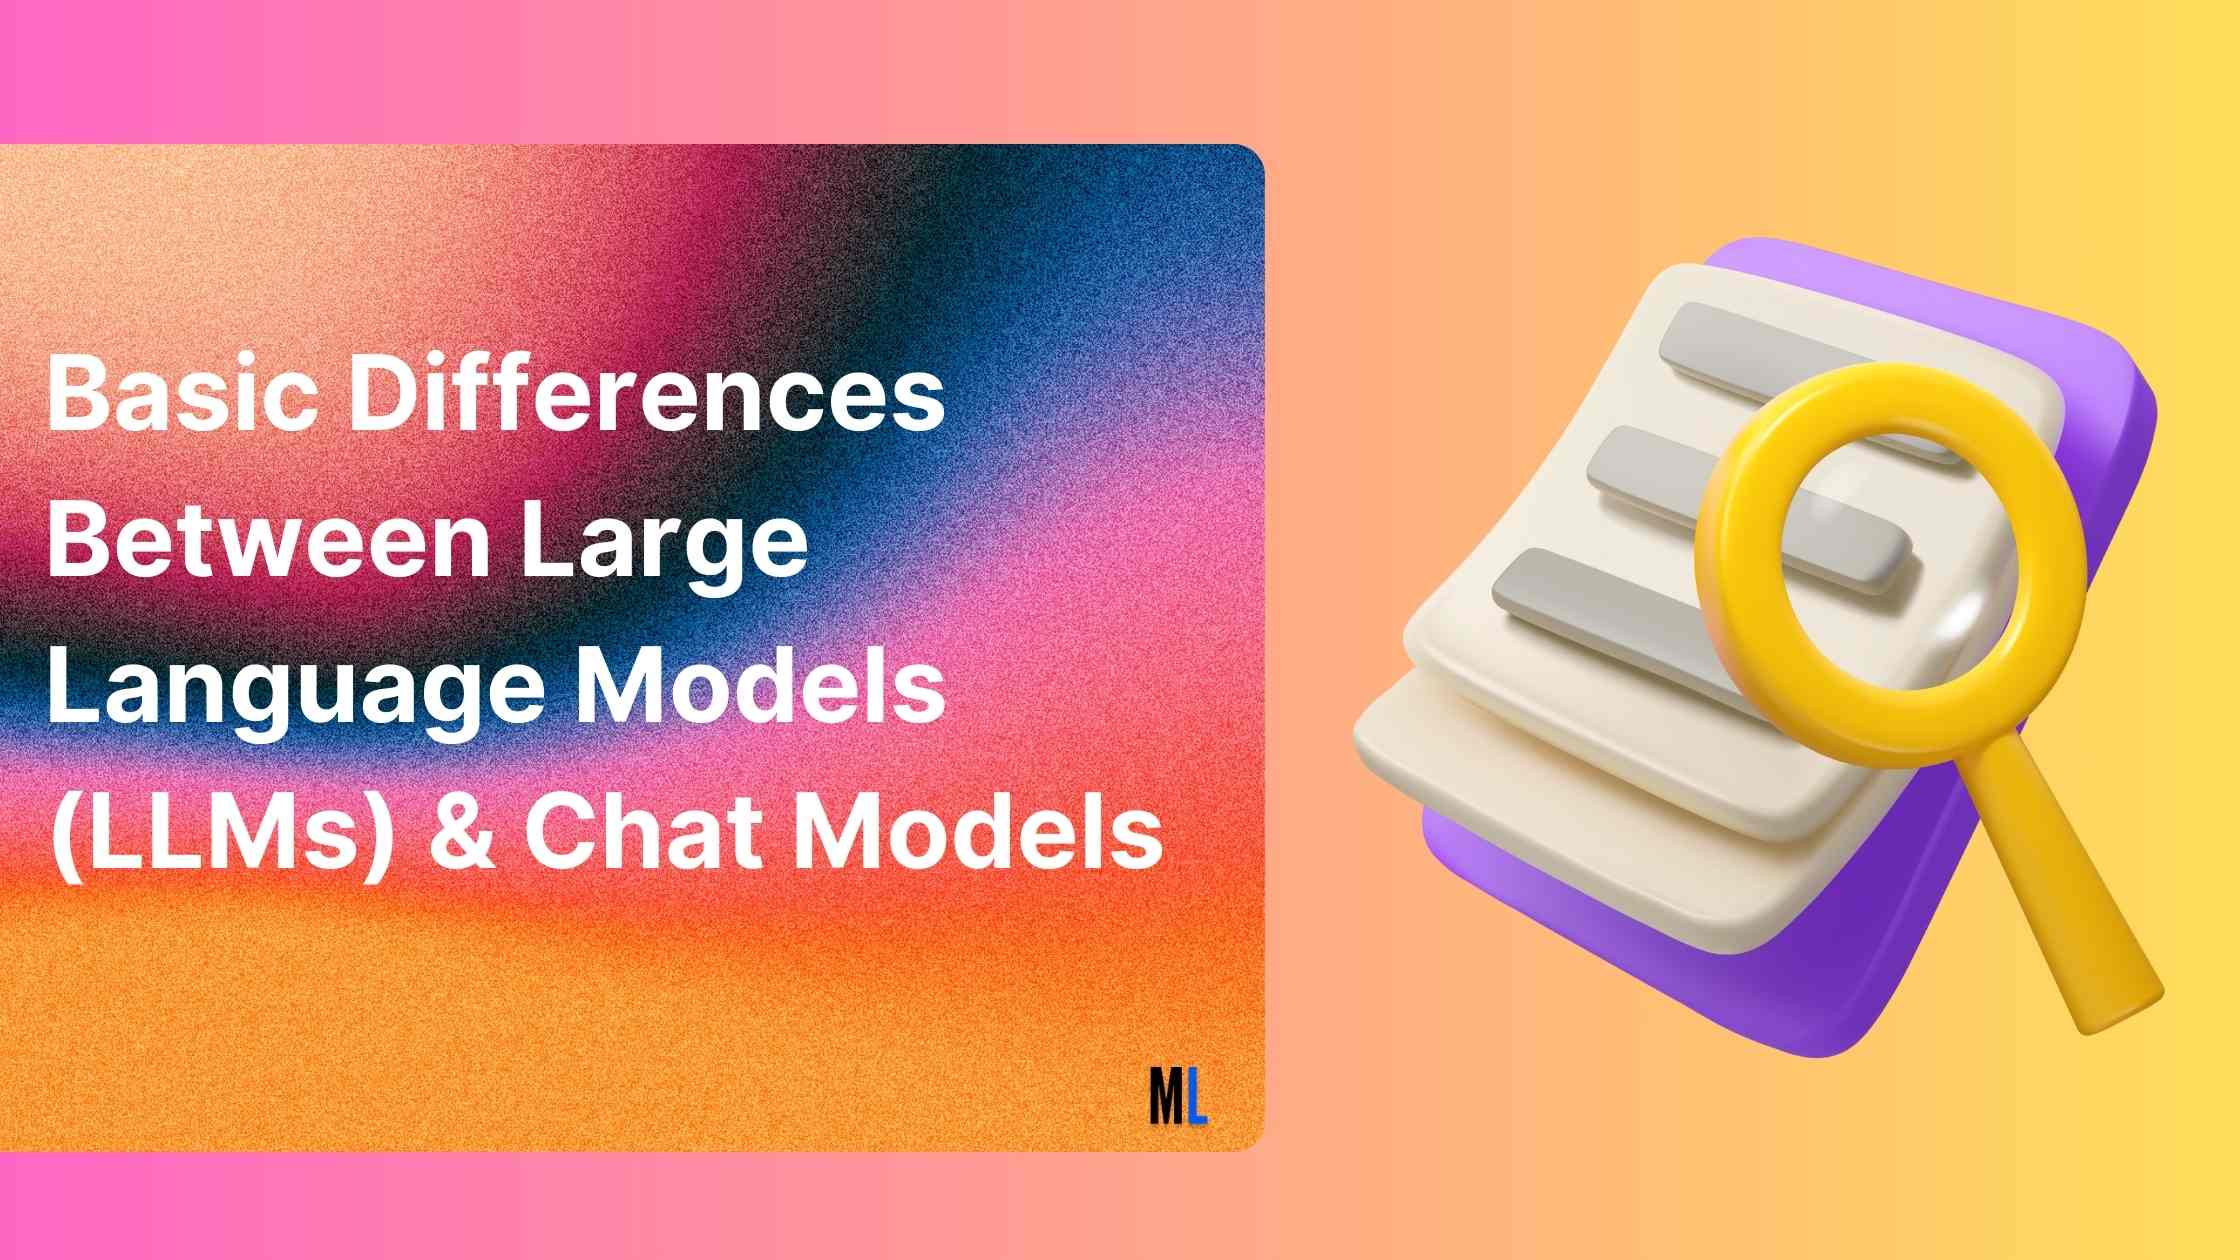 Understanding the Basic Differences Between Large Language Models (LLMs) and Chat Models 